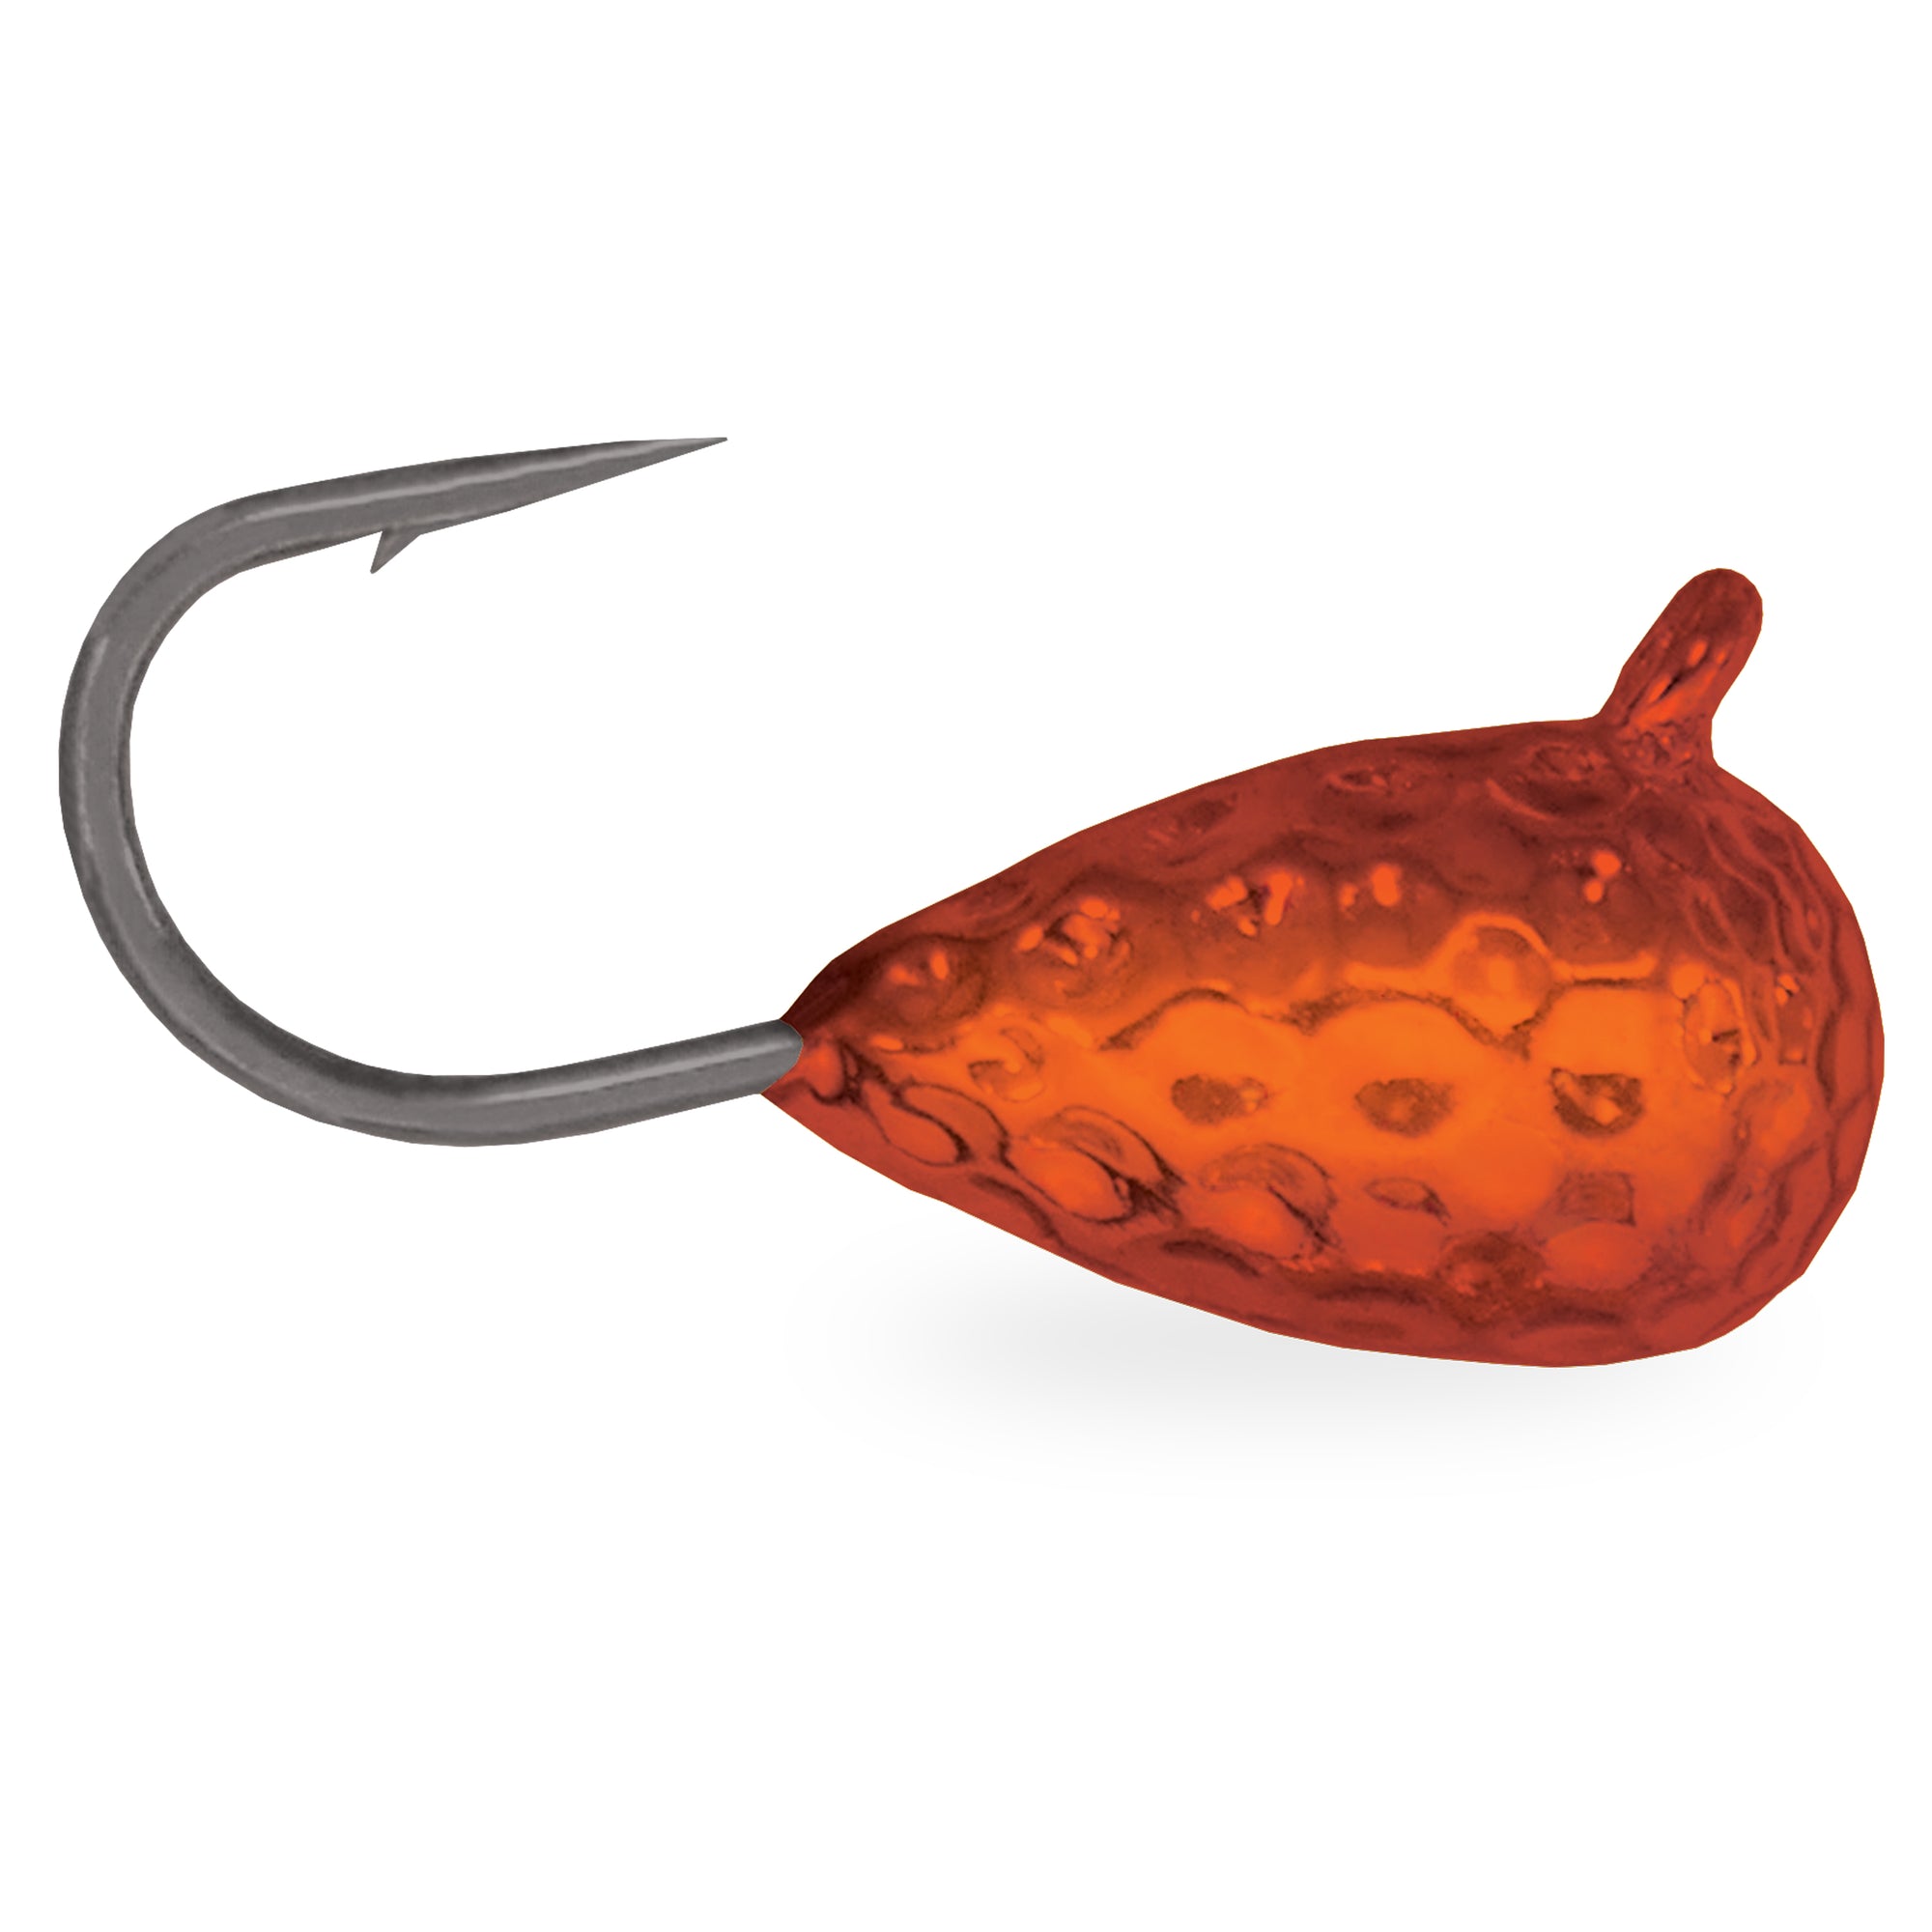 Dynamic Lures HD Ice 2 2/10 Oz Ice Fishing Jig Lure (Fire Tiger) : Buy  Online at Best Price in KSA - Souq is now : Sporting Goods